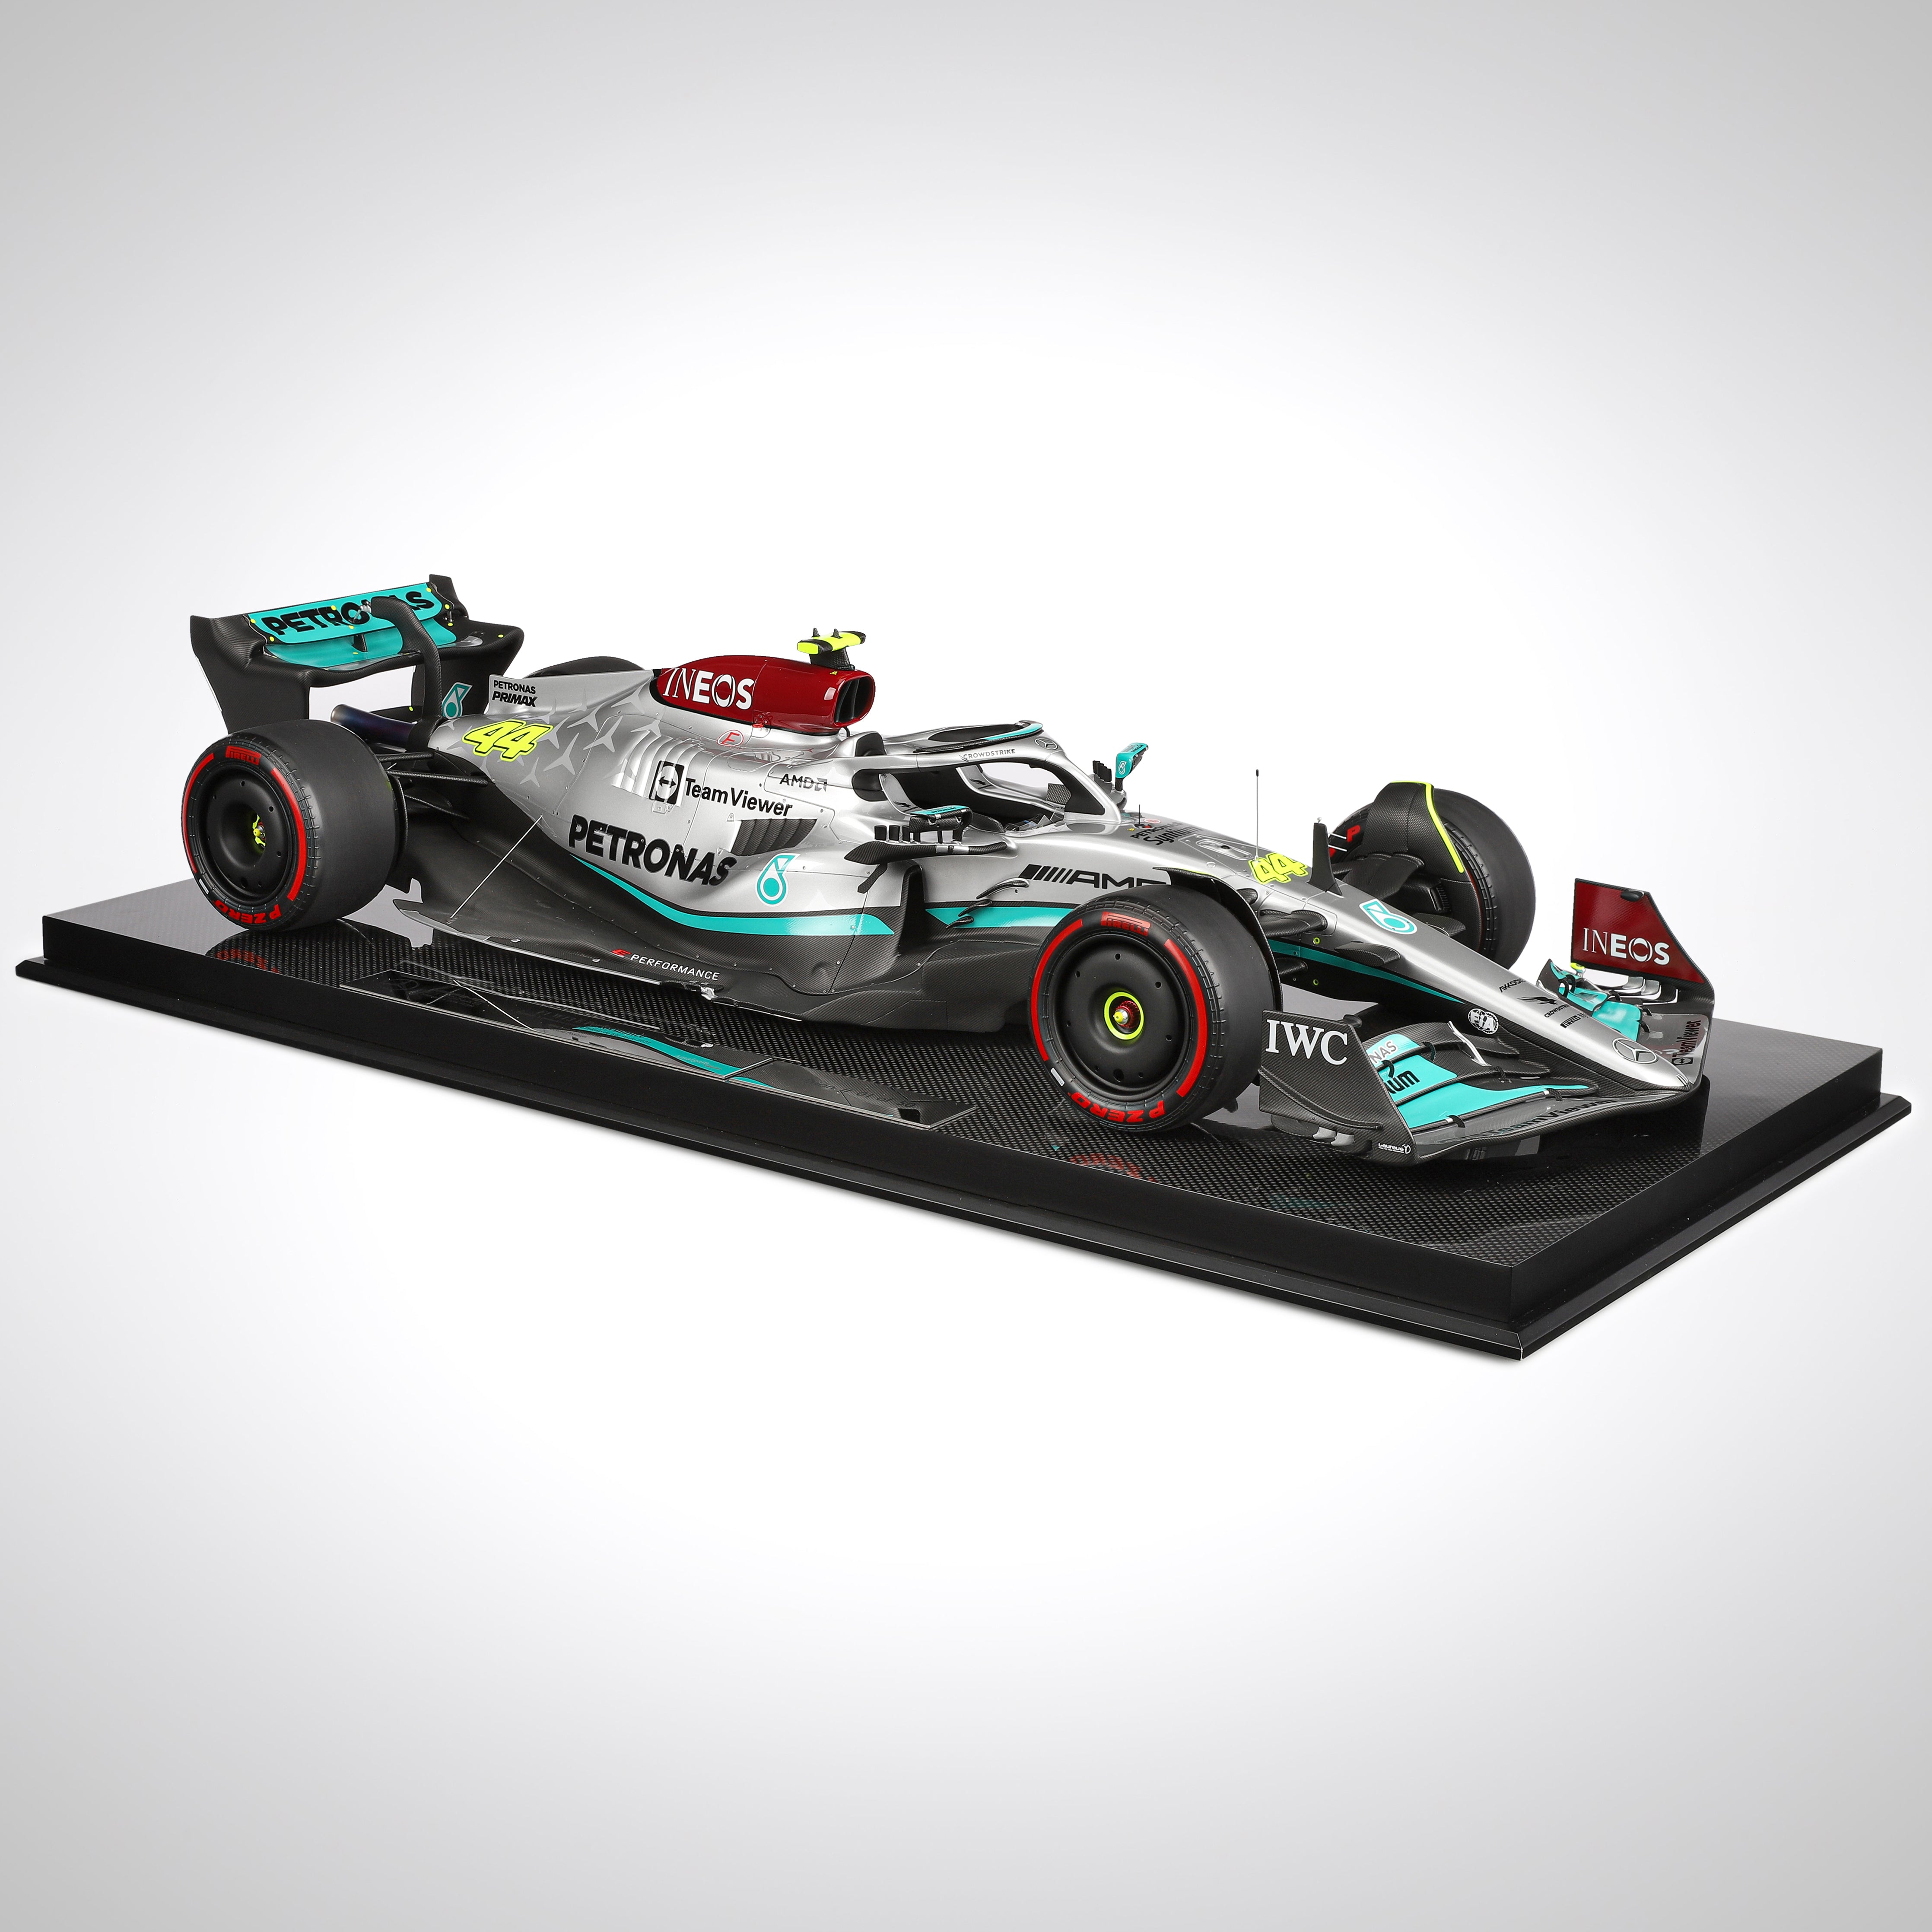 First 1/18 f1 diecast models, Sainz 2022 next! Anyone know where I can get  2013 Alonso? : r/f1models